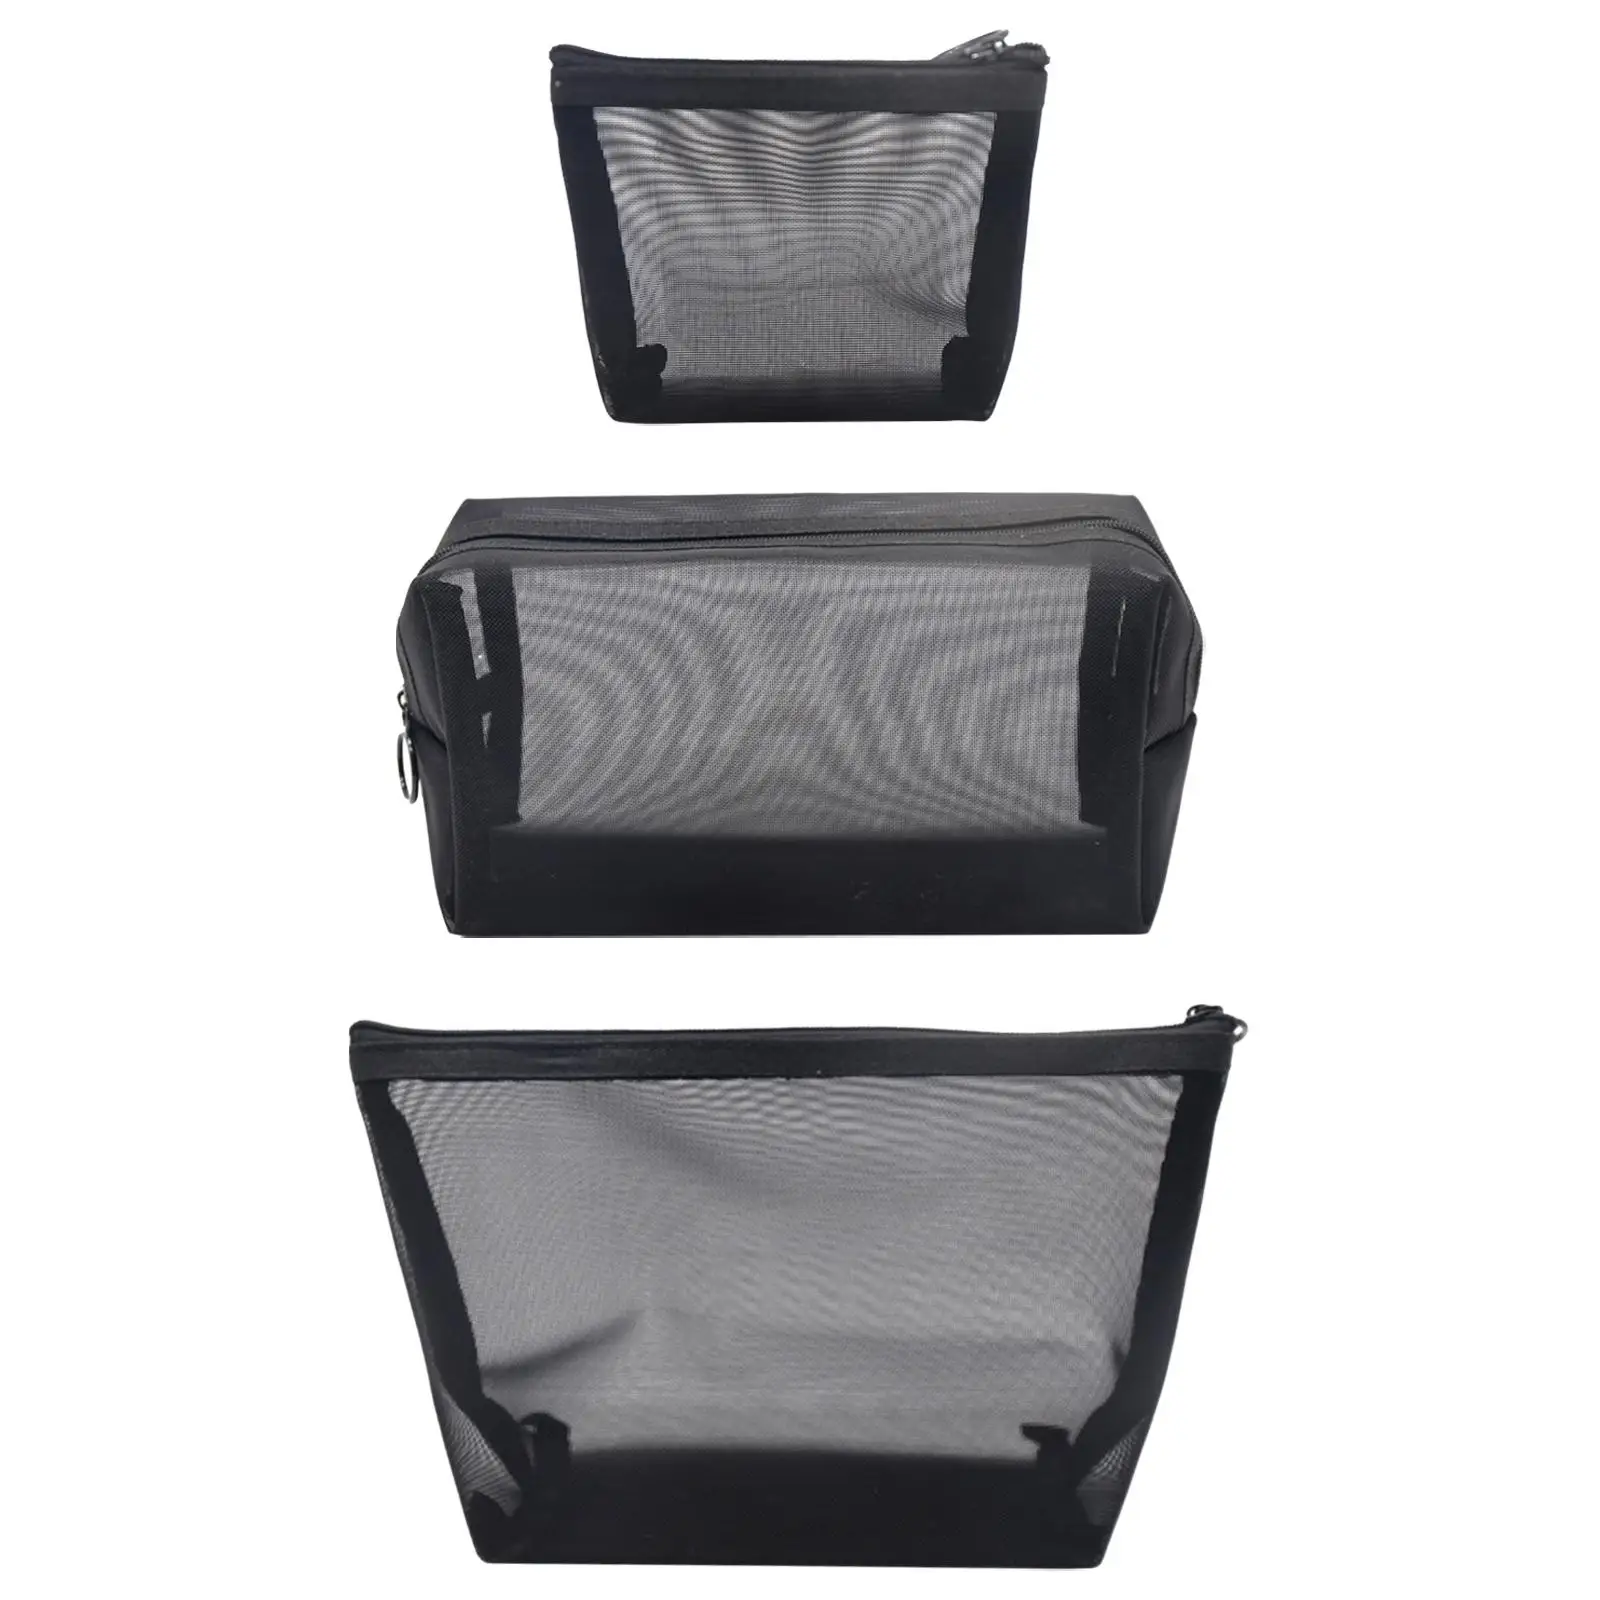 3x Mesh Makeup Bags Portable Multipurpose Zipper Opening Cosmetic Storage Bag for Gym Cosmetics Business Trip Hair Accessories